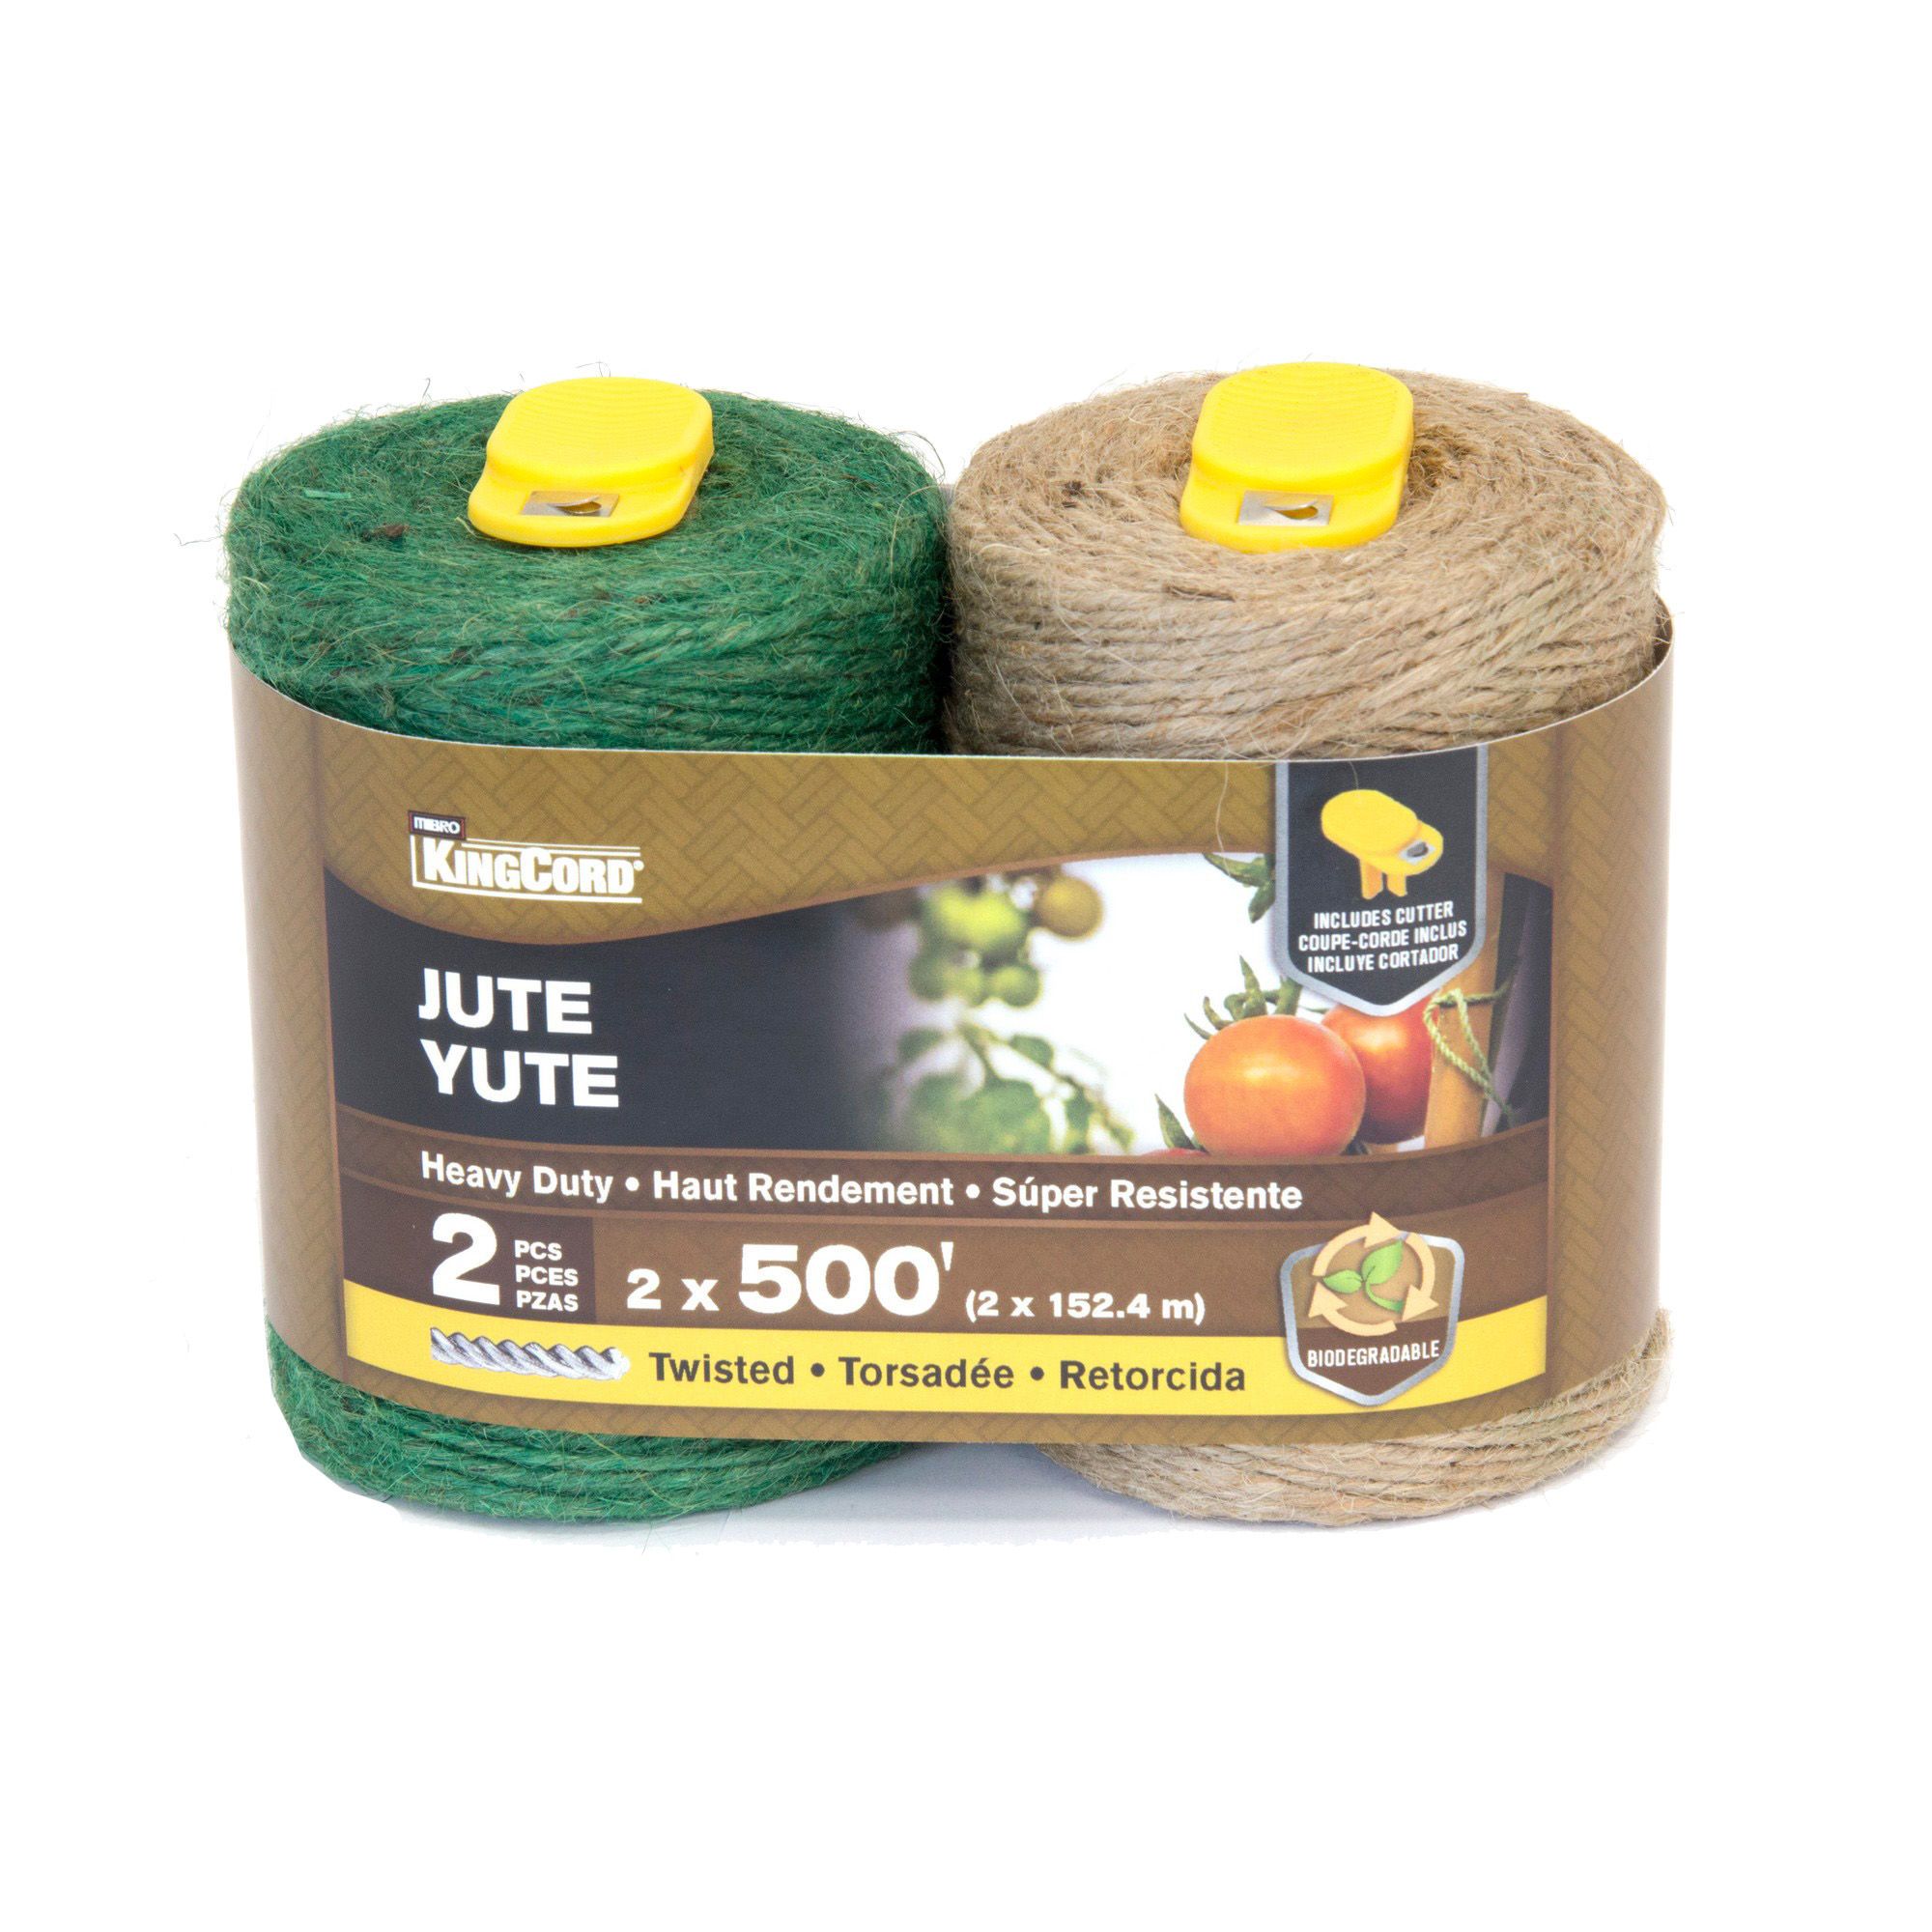 Jute Twine - Green/Natural - #24 x 190' - 2/Pkg from KINGCORD